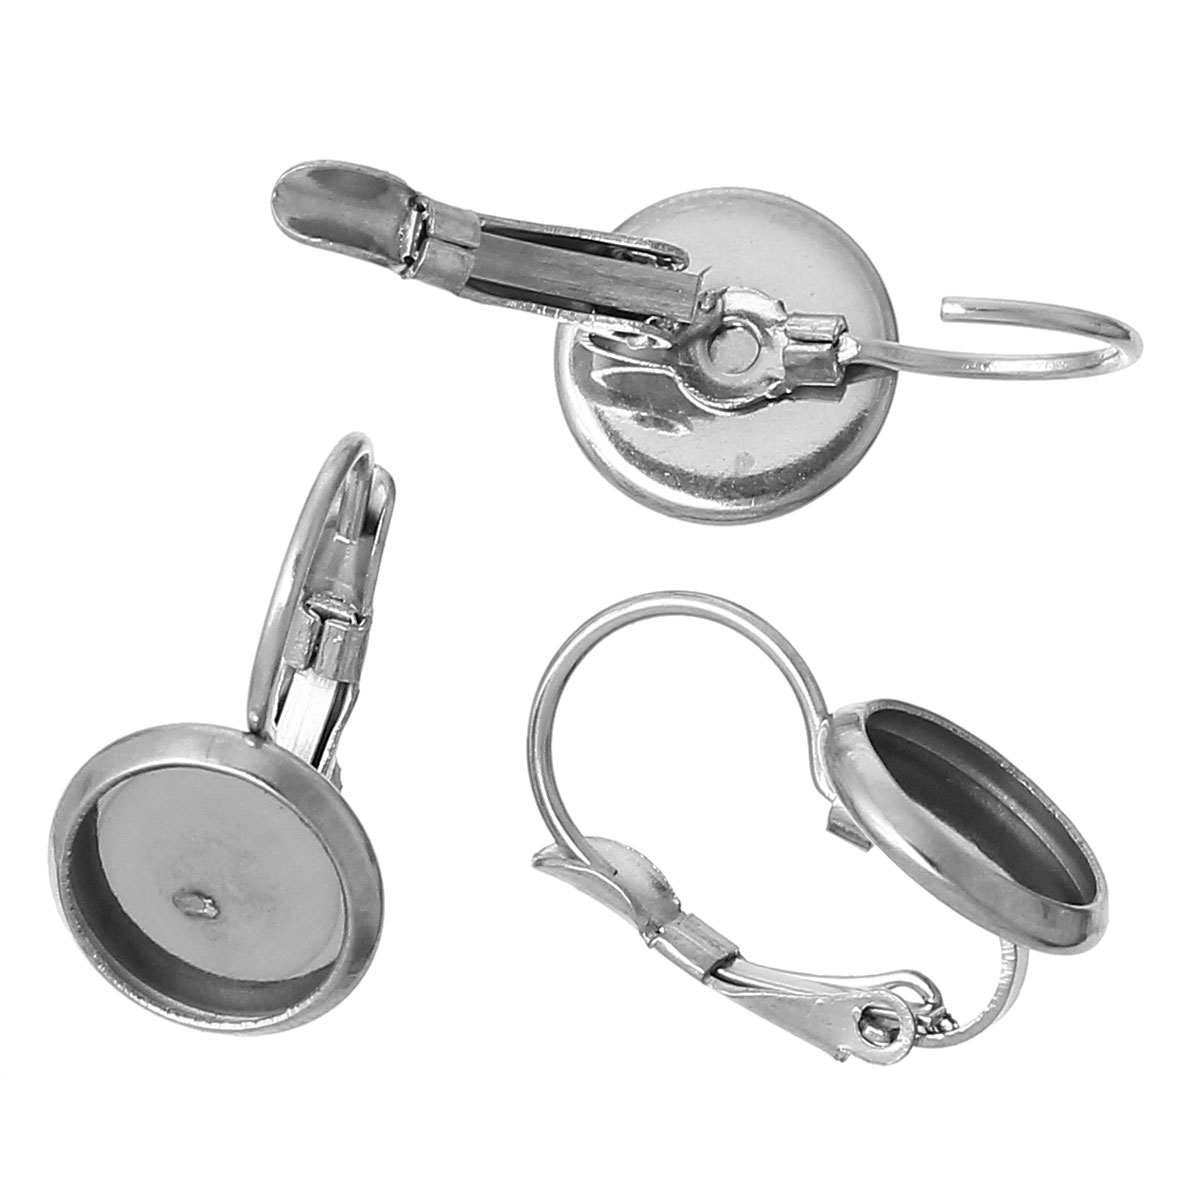 Picture of 304 Stainless Steel Lever Back Clips Earring Findings Silver Tone Cabochon Settings (Fits 8mm Dia) 18mm( 6/8") x 10mm( 3/8"), 10 PCs